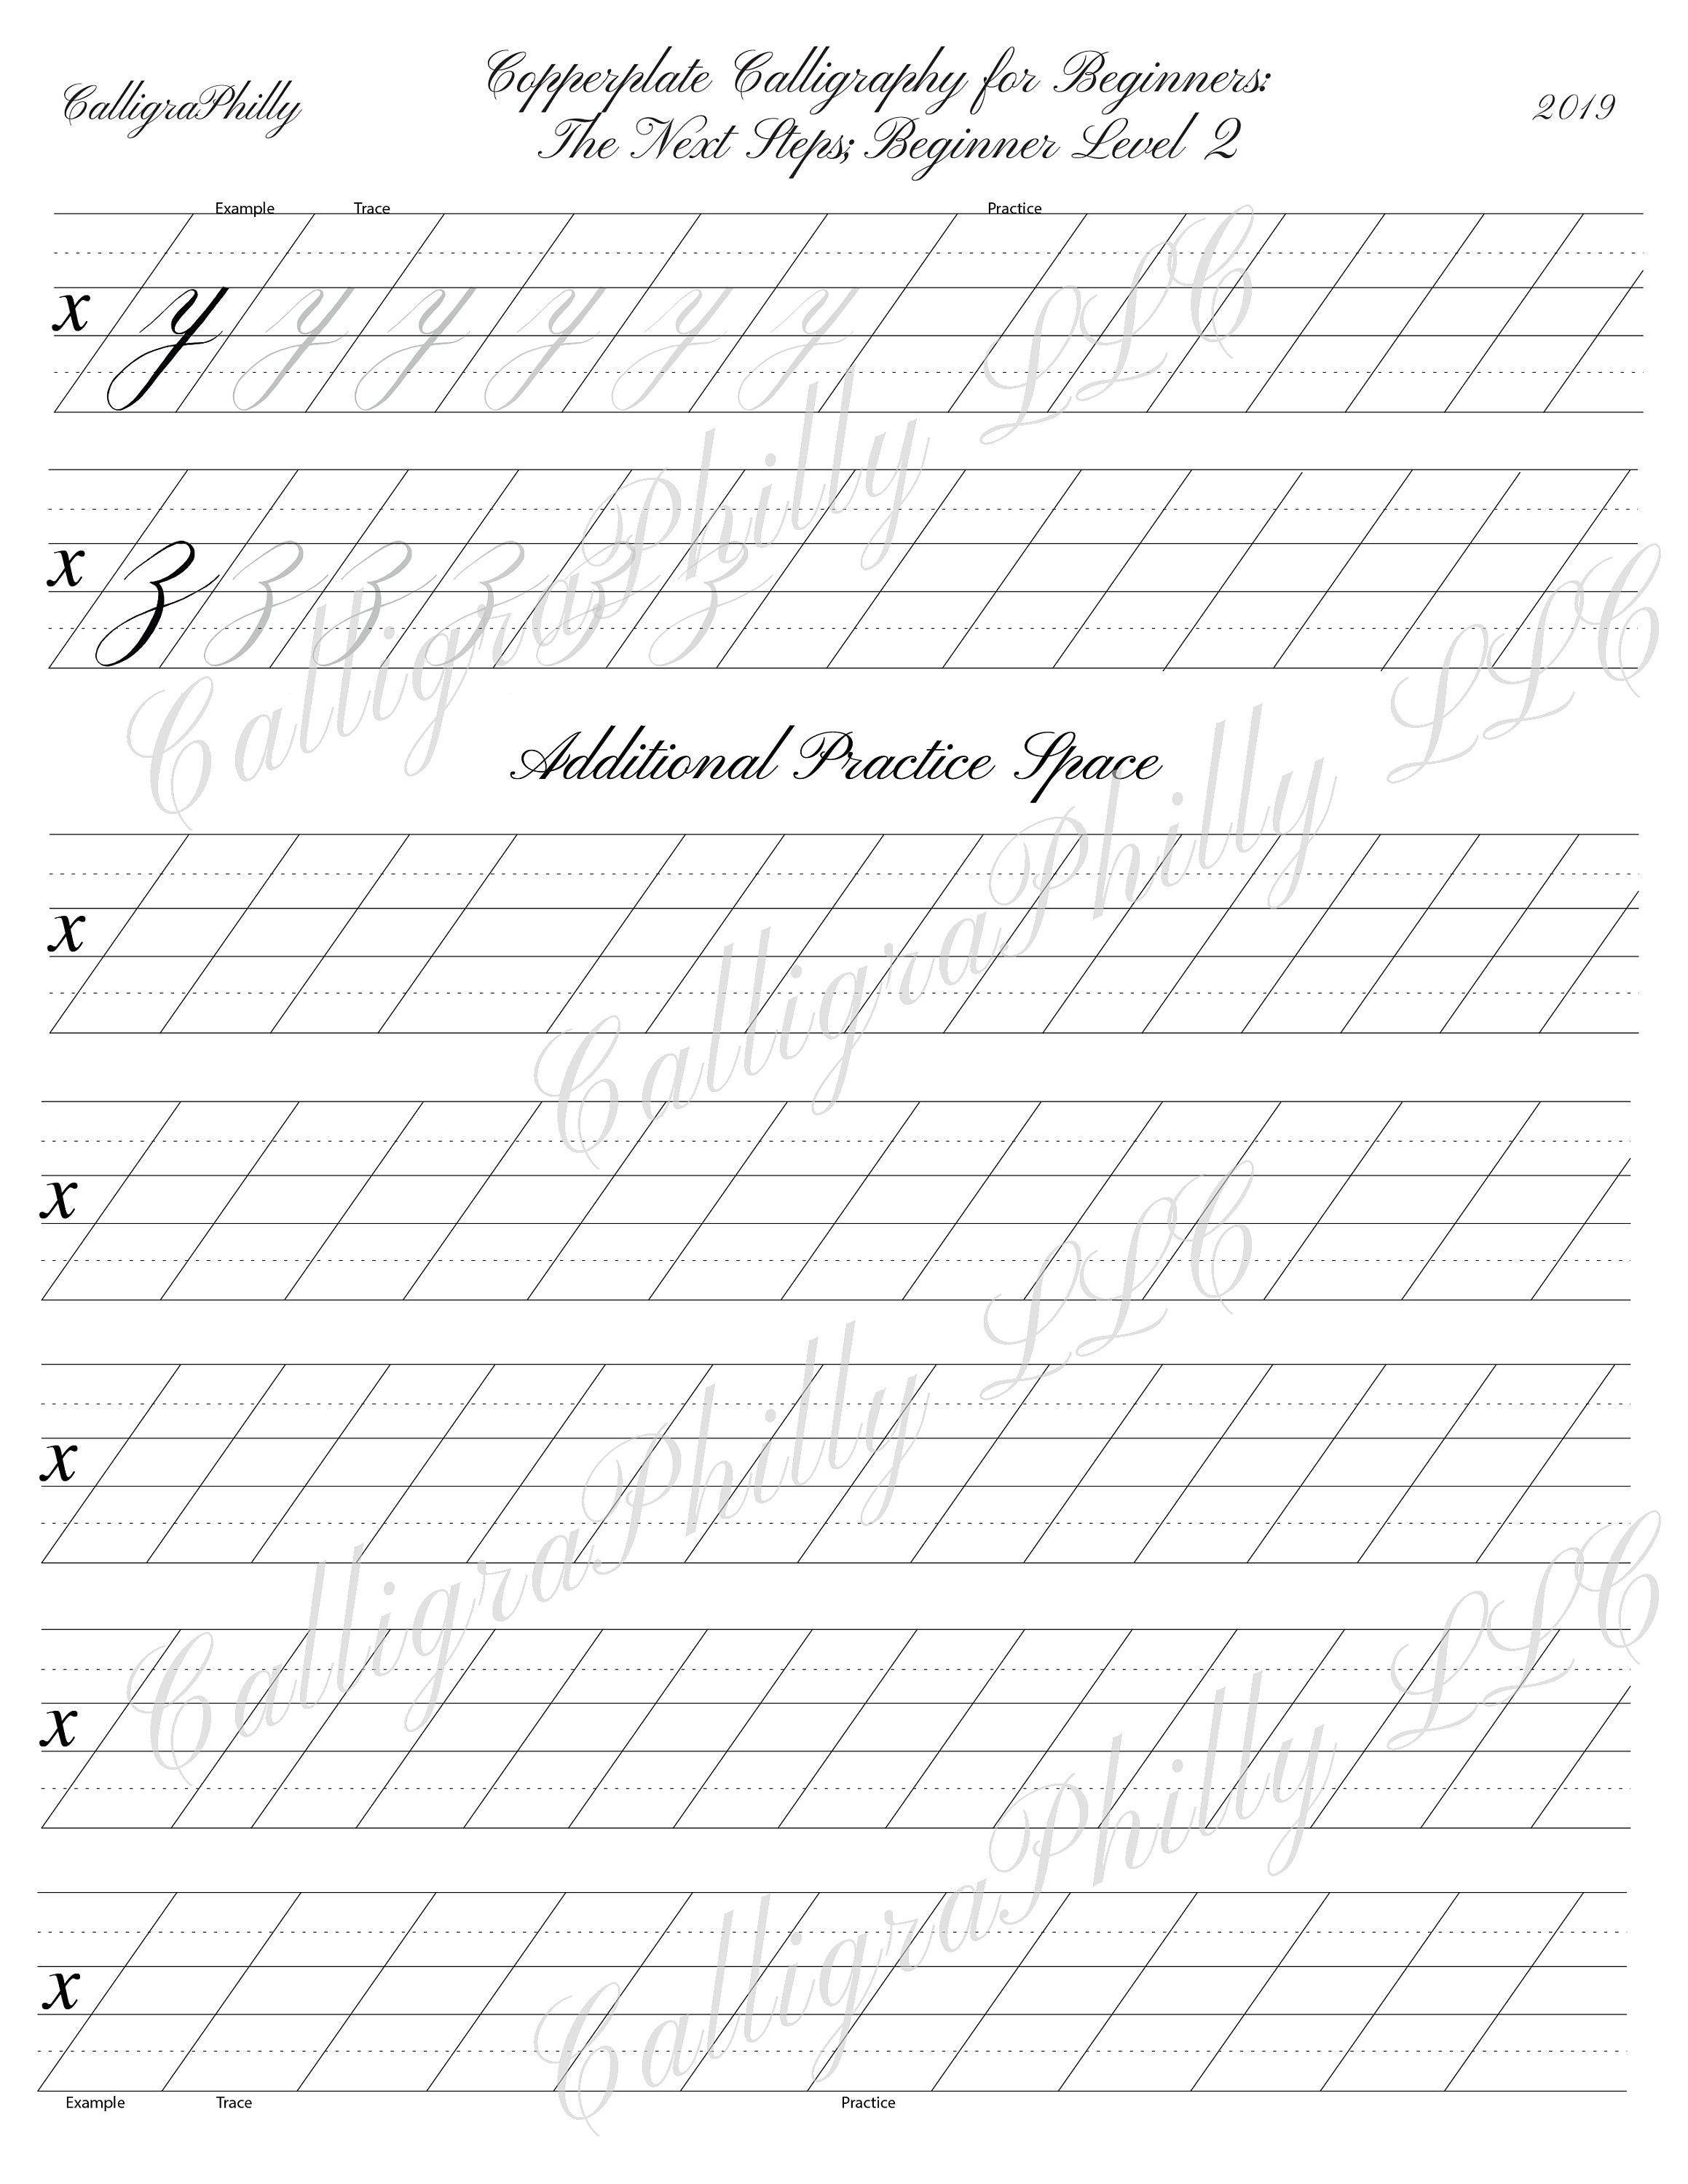 Blank Copperplate Calligraphy Guide Sheets Digital Download 19